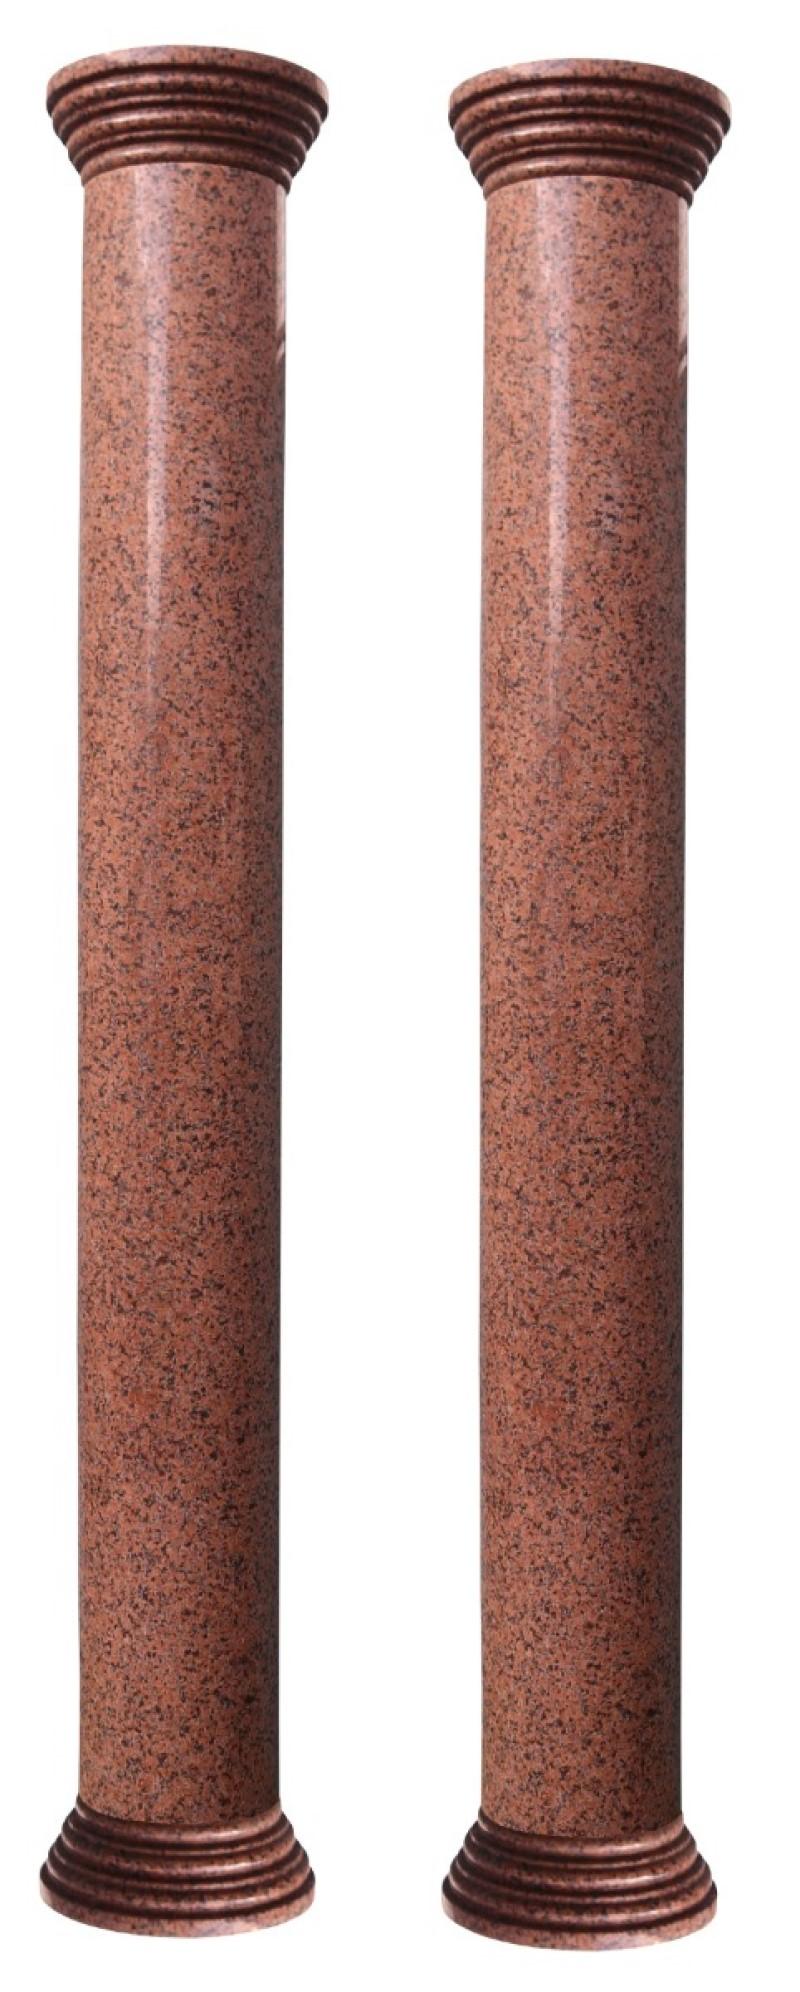 A pair of matching antique granite columns salvaged from a bank in Birmingham.
 
Additional Dimensions:
 
Capital and socle heights 14.5 cm each
 
Pillars 240 cm each
 
Diameter of the capital and socle 42.5 cm
 
Column Diameter 30 cm